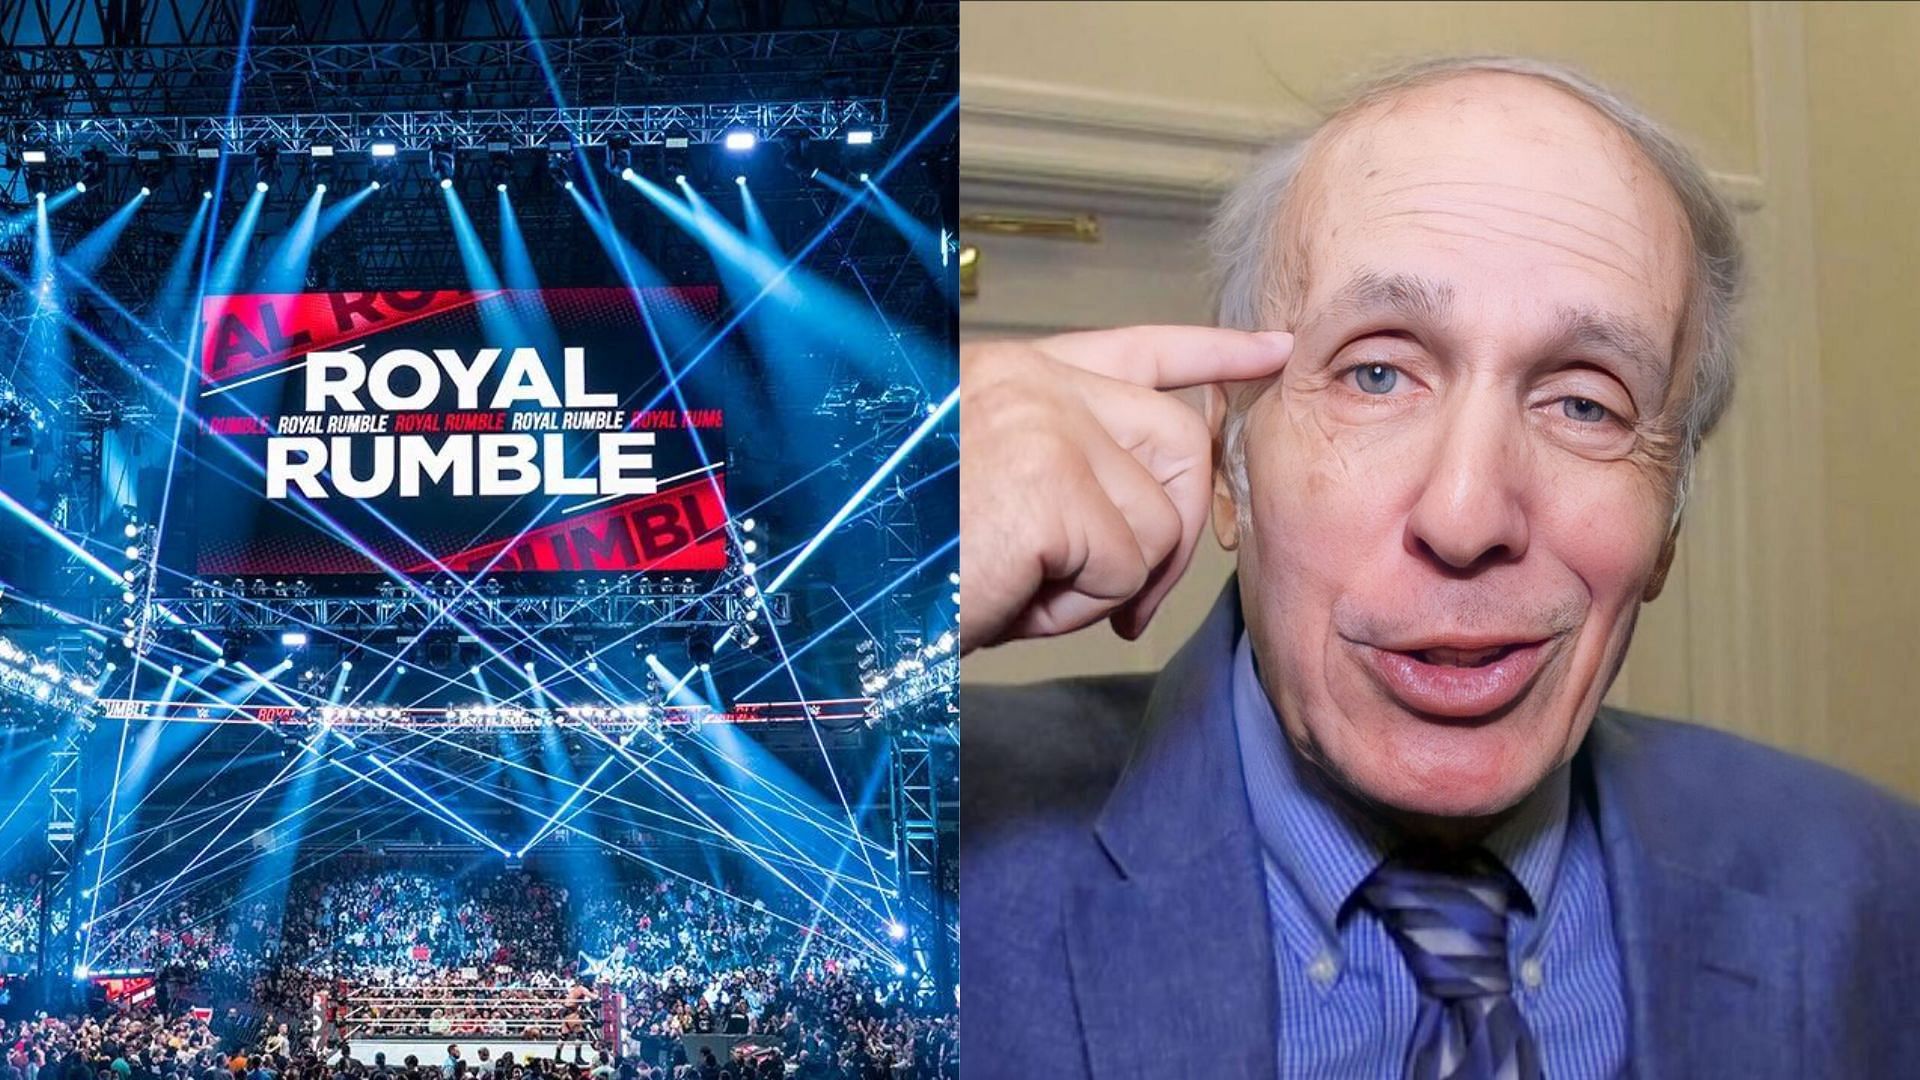 Major surprise being planned for Royal Rumble?